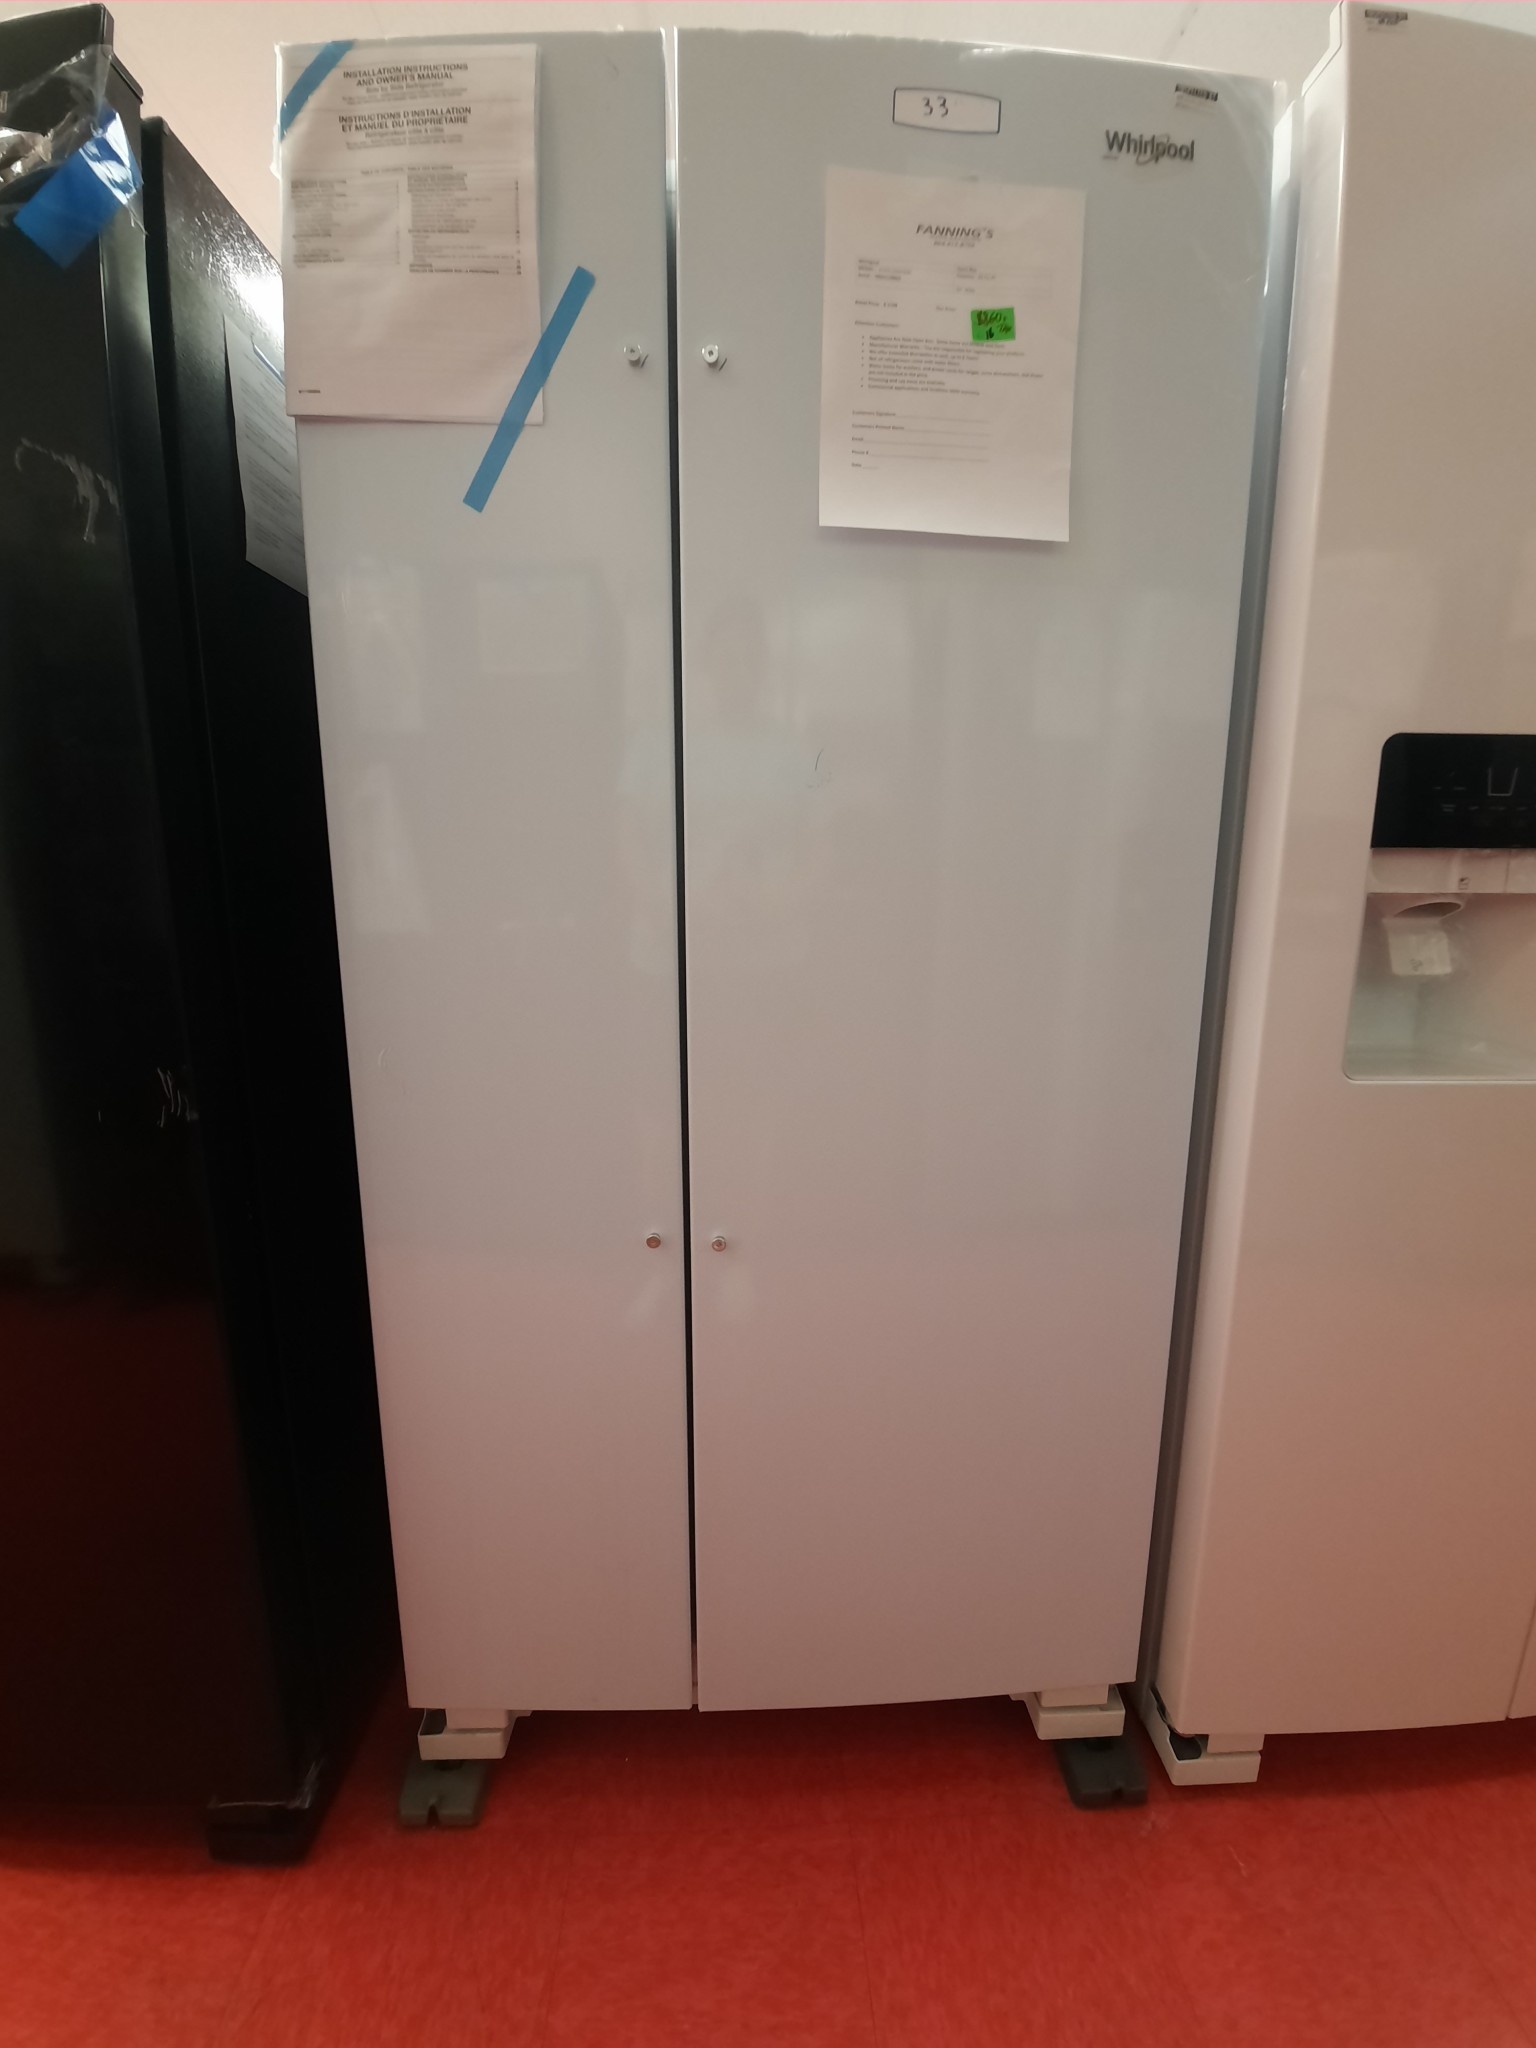 Whirlpool *Whirlpool WRS312SNHW 22 cu. Ft. Side by Side Refrigerator in White